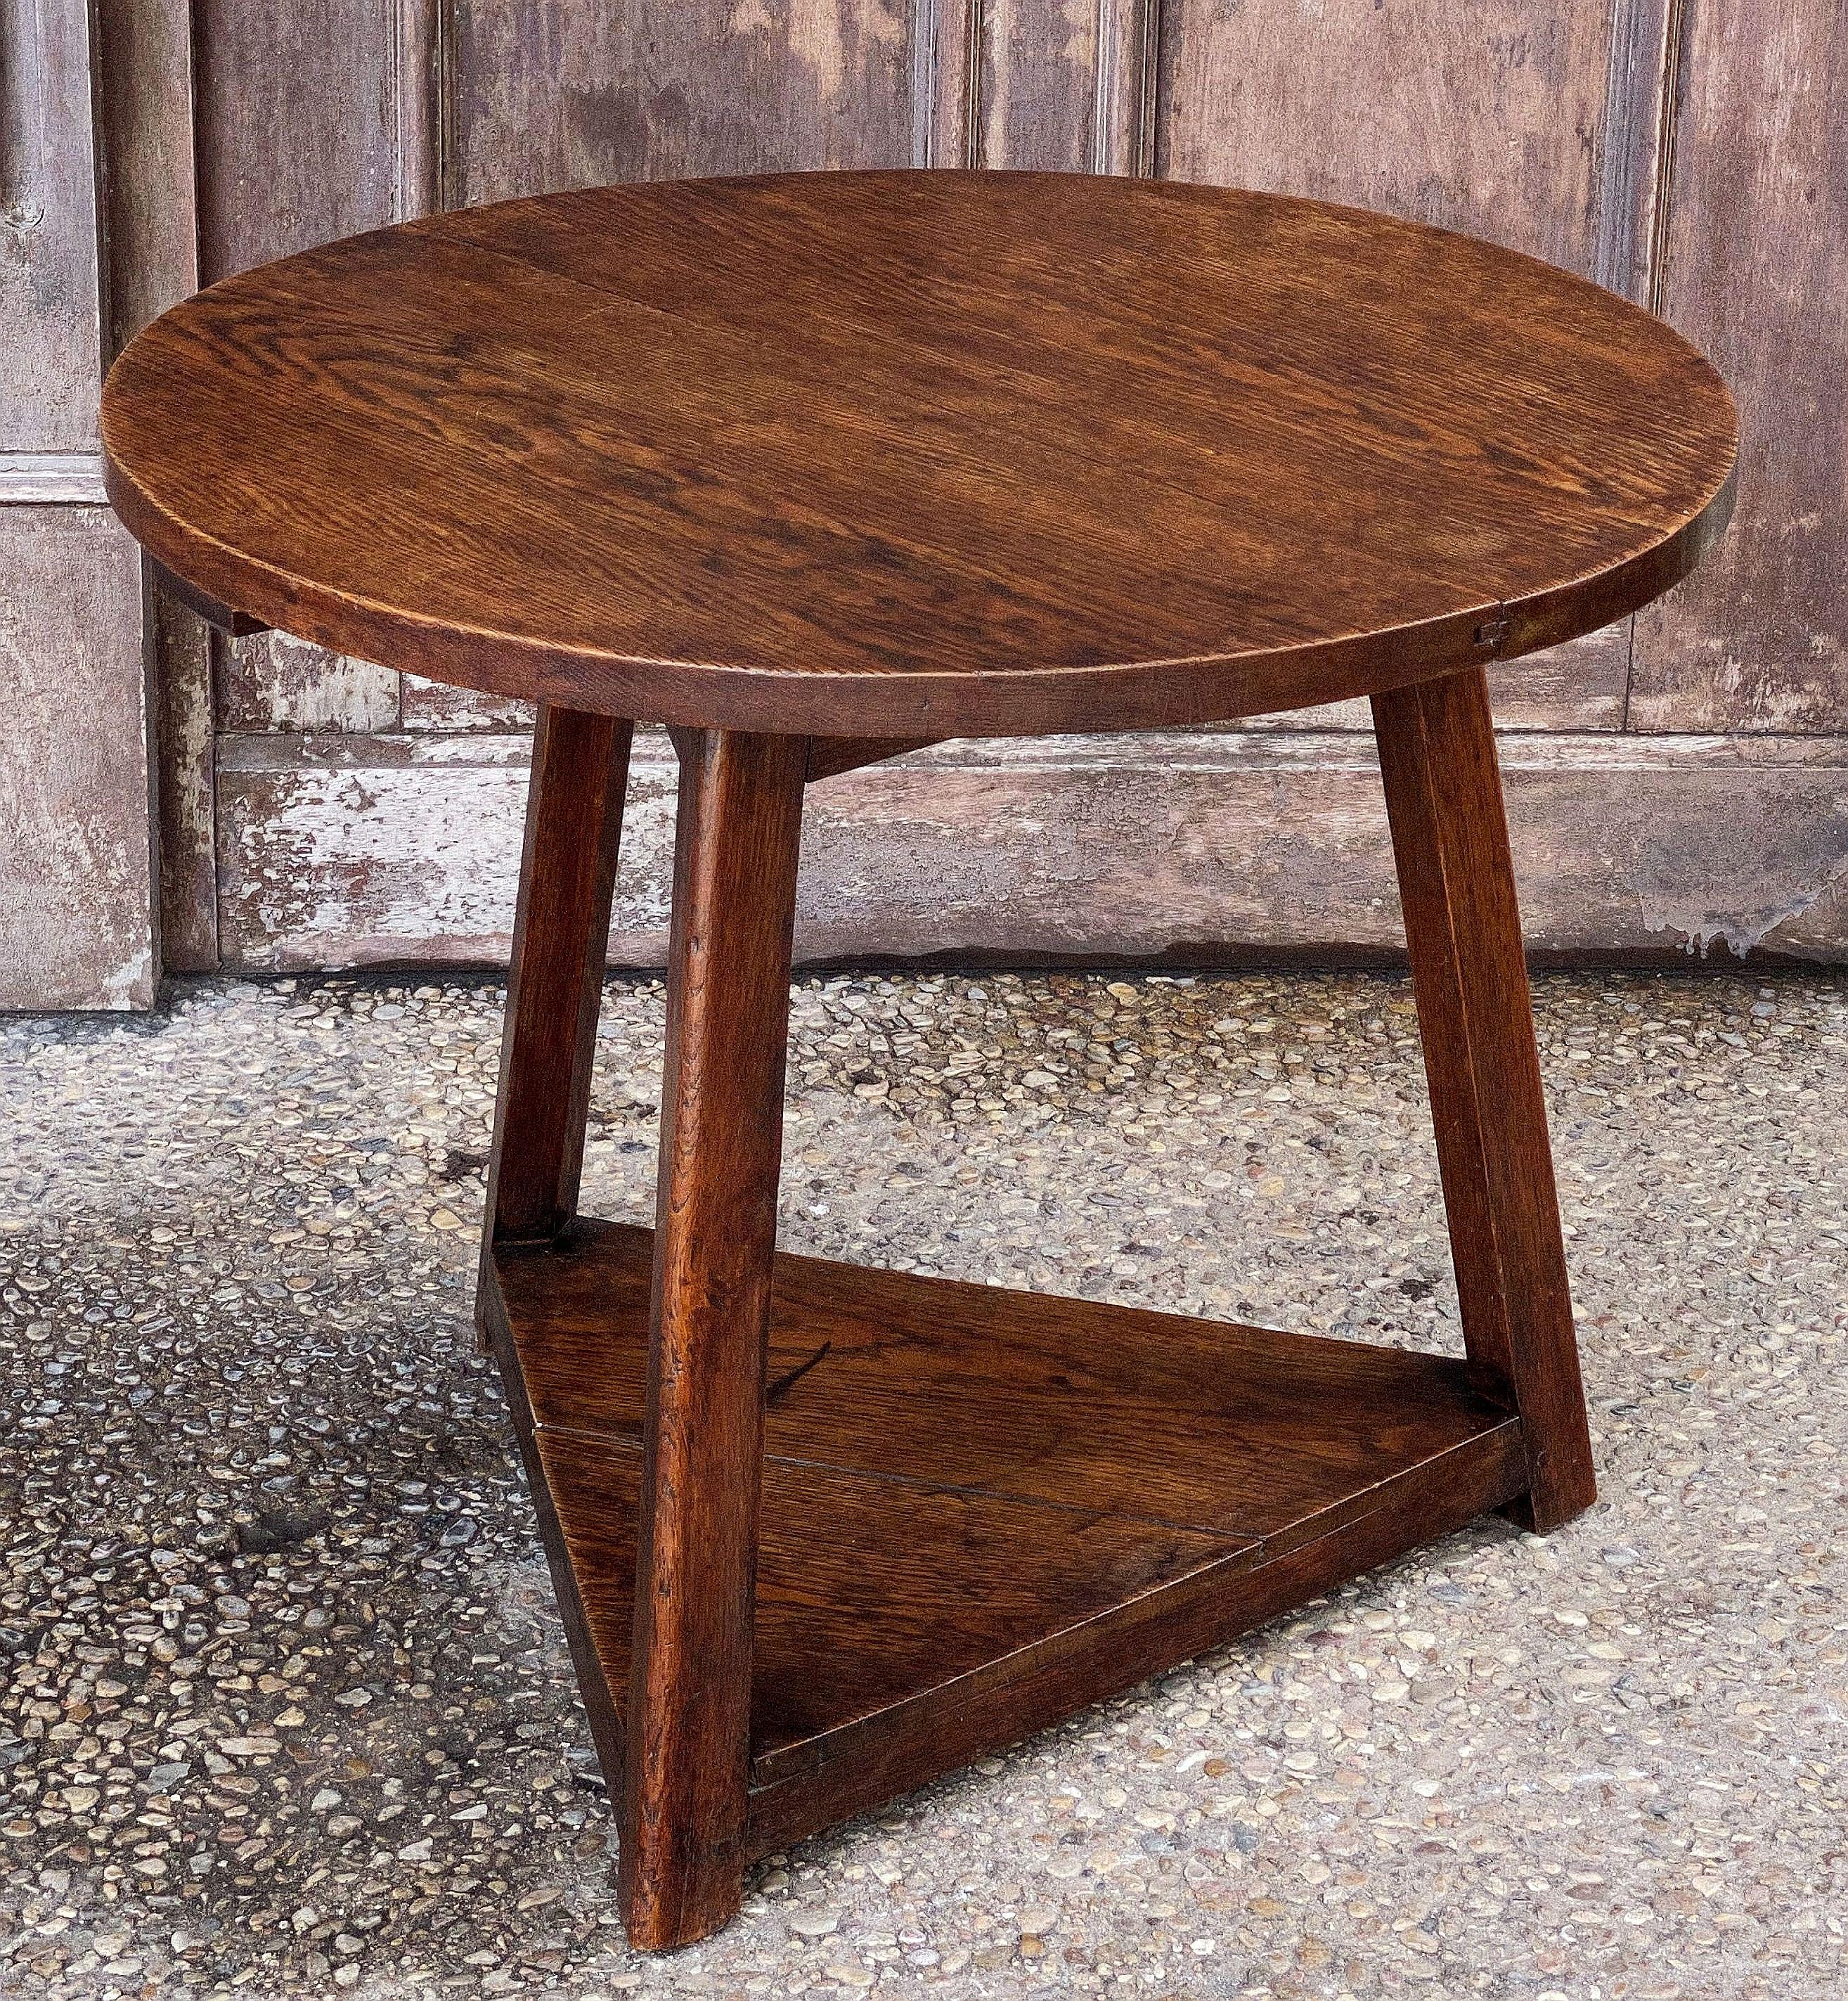 A fine English cricket table of oak, featuring a finely patinated traditional round or circular top over a tripod base, with triangular bottom tier, and straight legs.

Makes a nice occasional table or side table.

Dimensions are height 23 1/2